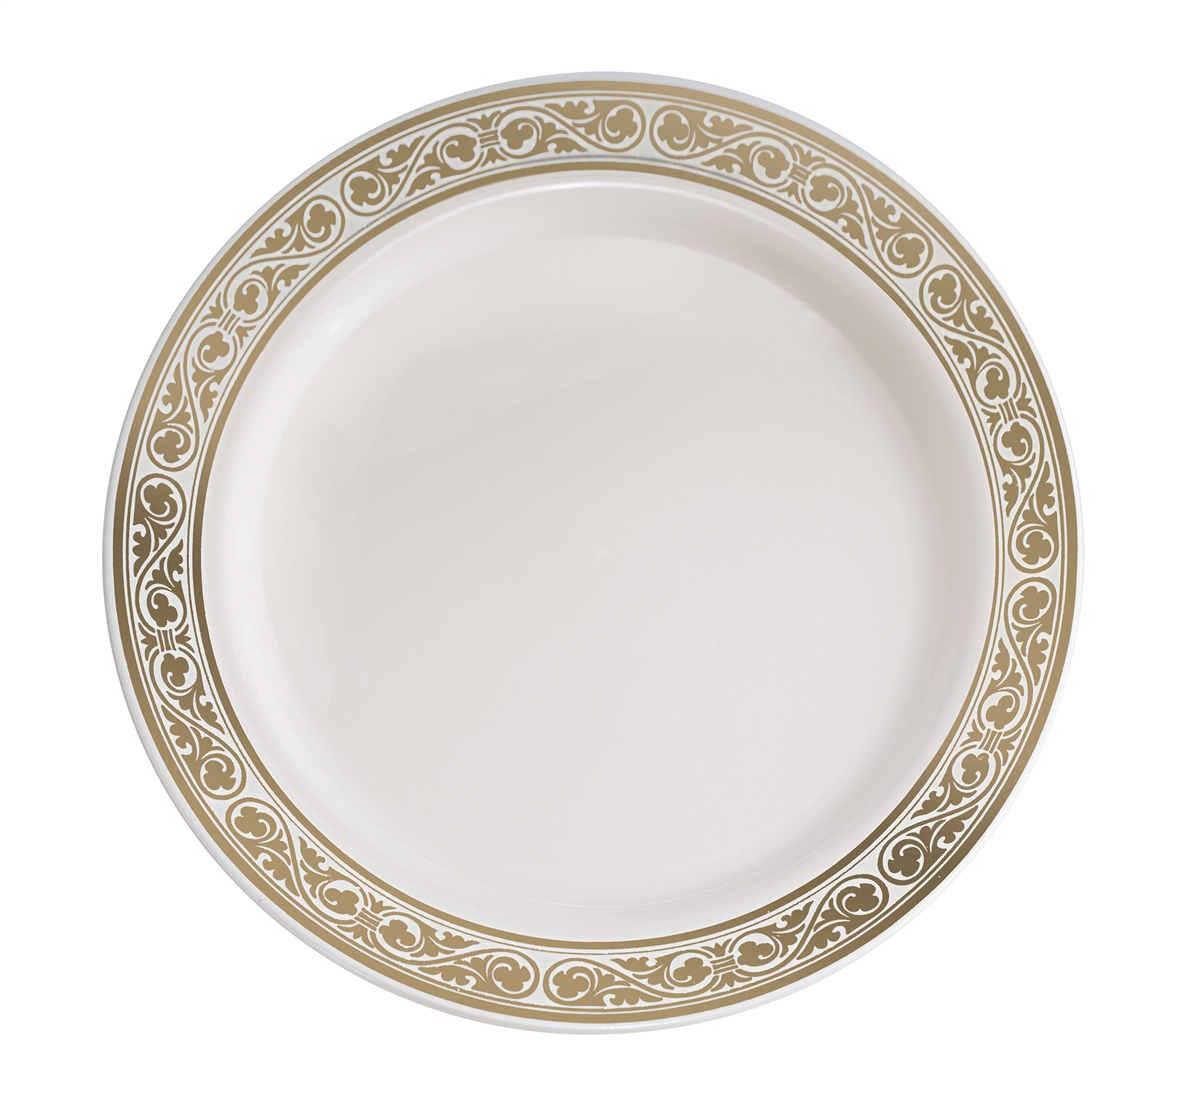 Royalty High End Plastic Plates Ivory/Gold 10 Count